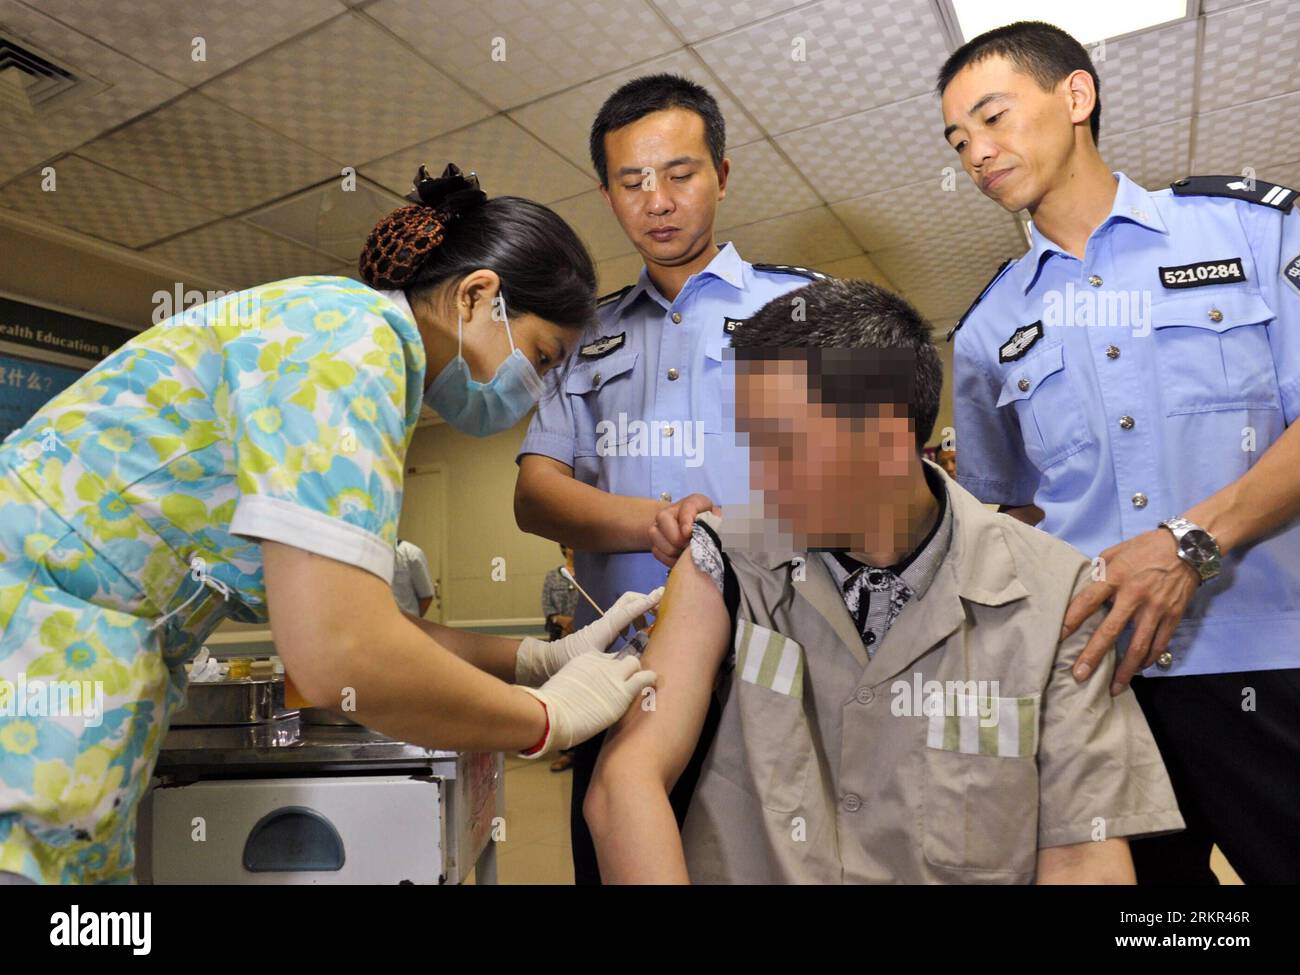 Bildnummer: 58115360  Datum: 18.06.2012  Copyright: imago/Xinhua (120618) -- CHONGQING, June 18, 2012 (Xinhua) -- The prisoner father surnamed Gao (R, front), is injected with medical agent before donating his stem cells to his son Jun Jie at Xinqiao Hospital in Chongqing, southwest China, June 12, 2012. A family is facing an anxious wait to see whether a bone marrow transplant, made possible by the incarcerated father s rare trans-provincial prison transfer, has saved their son s life. PUBLICATIONxNOTxINxCHN Gesellschaft Fotostory Leukämie Medizin Knochenmarkspende Stammzellen Stammzellenther Stock Photo